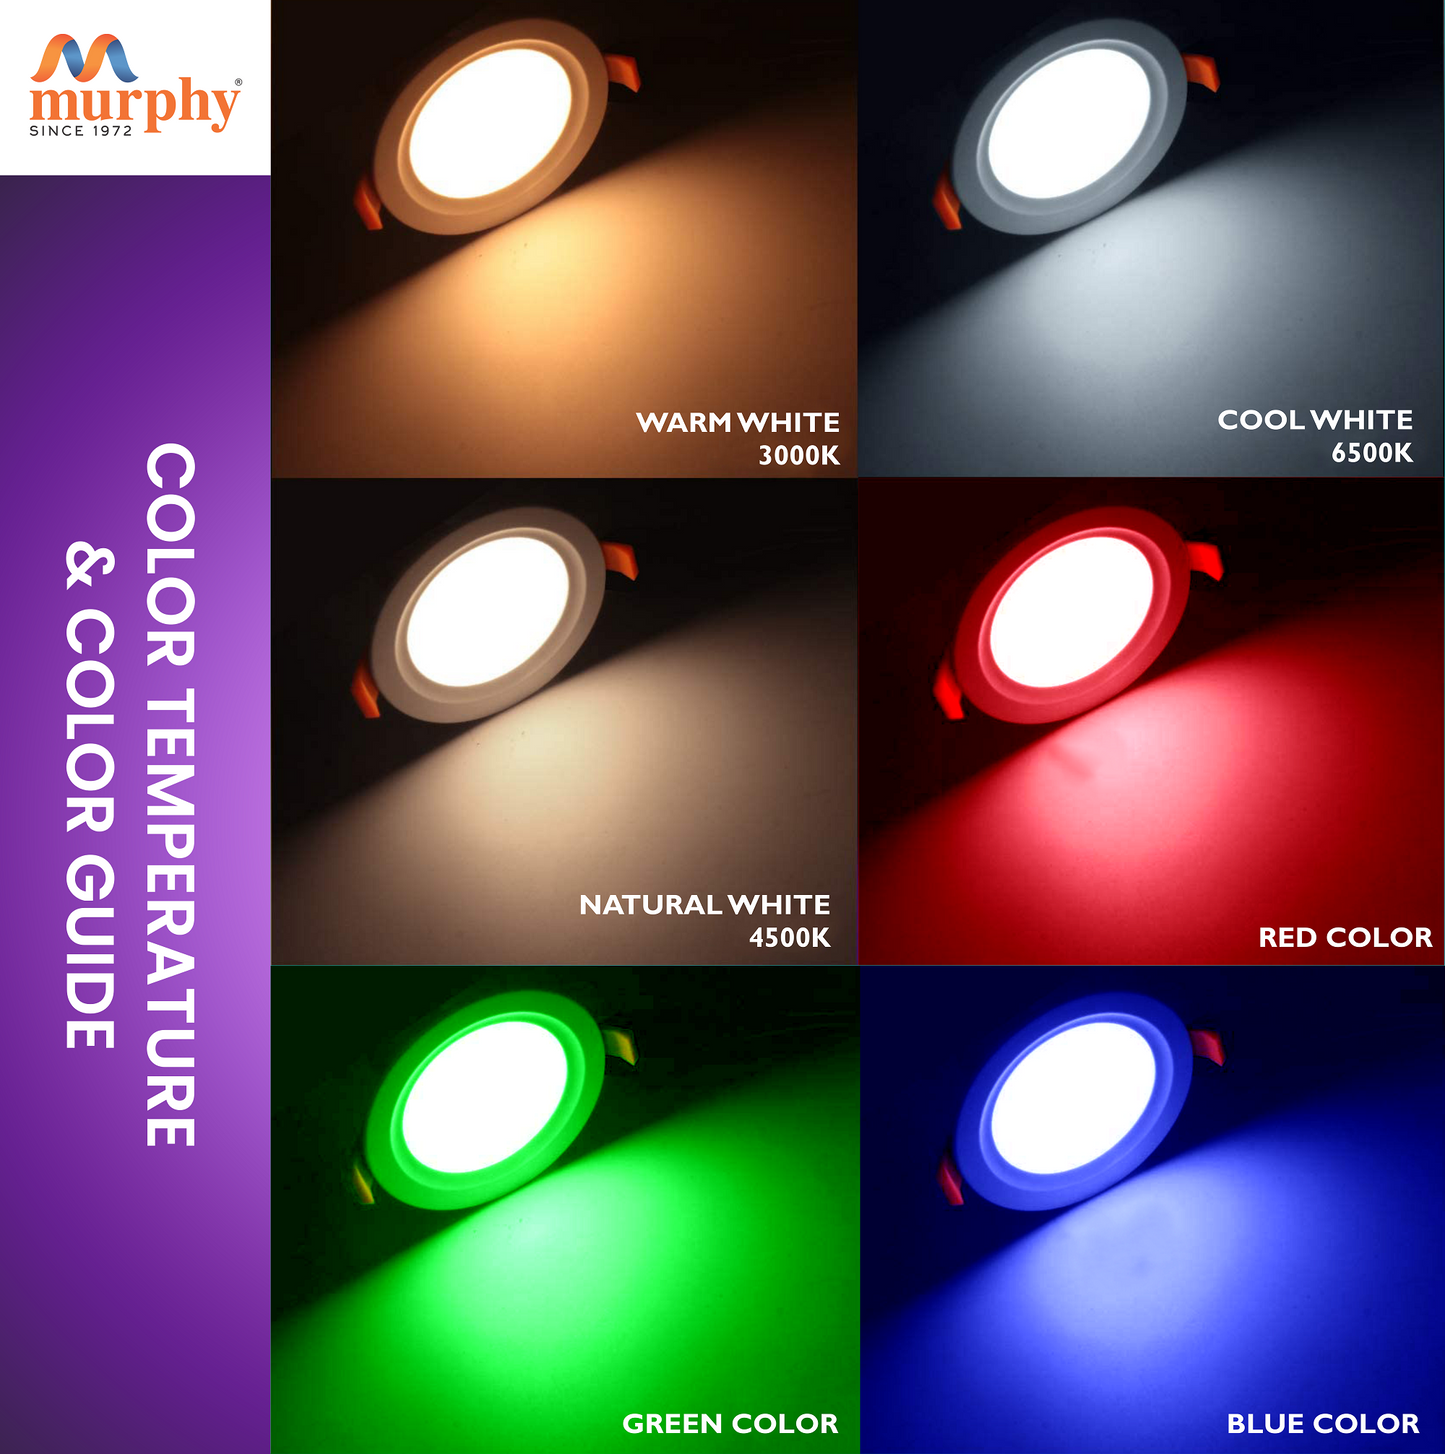 Murphy 3W Aura LED Color Changing Down Light